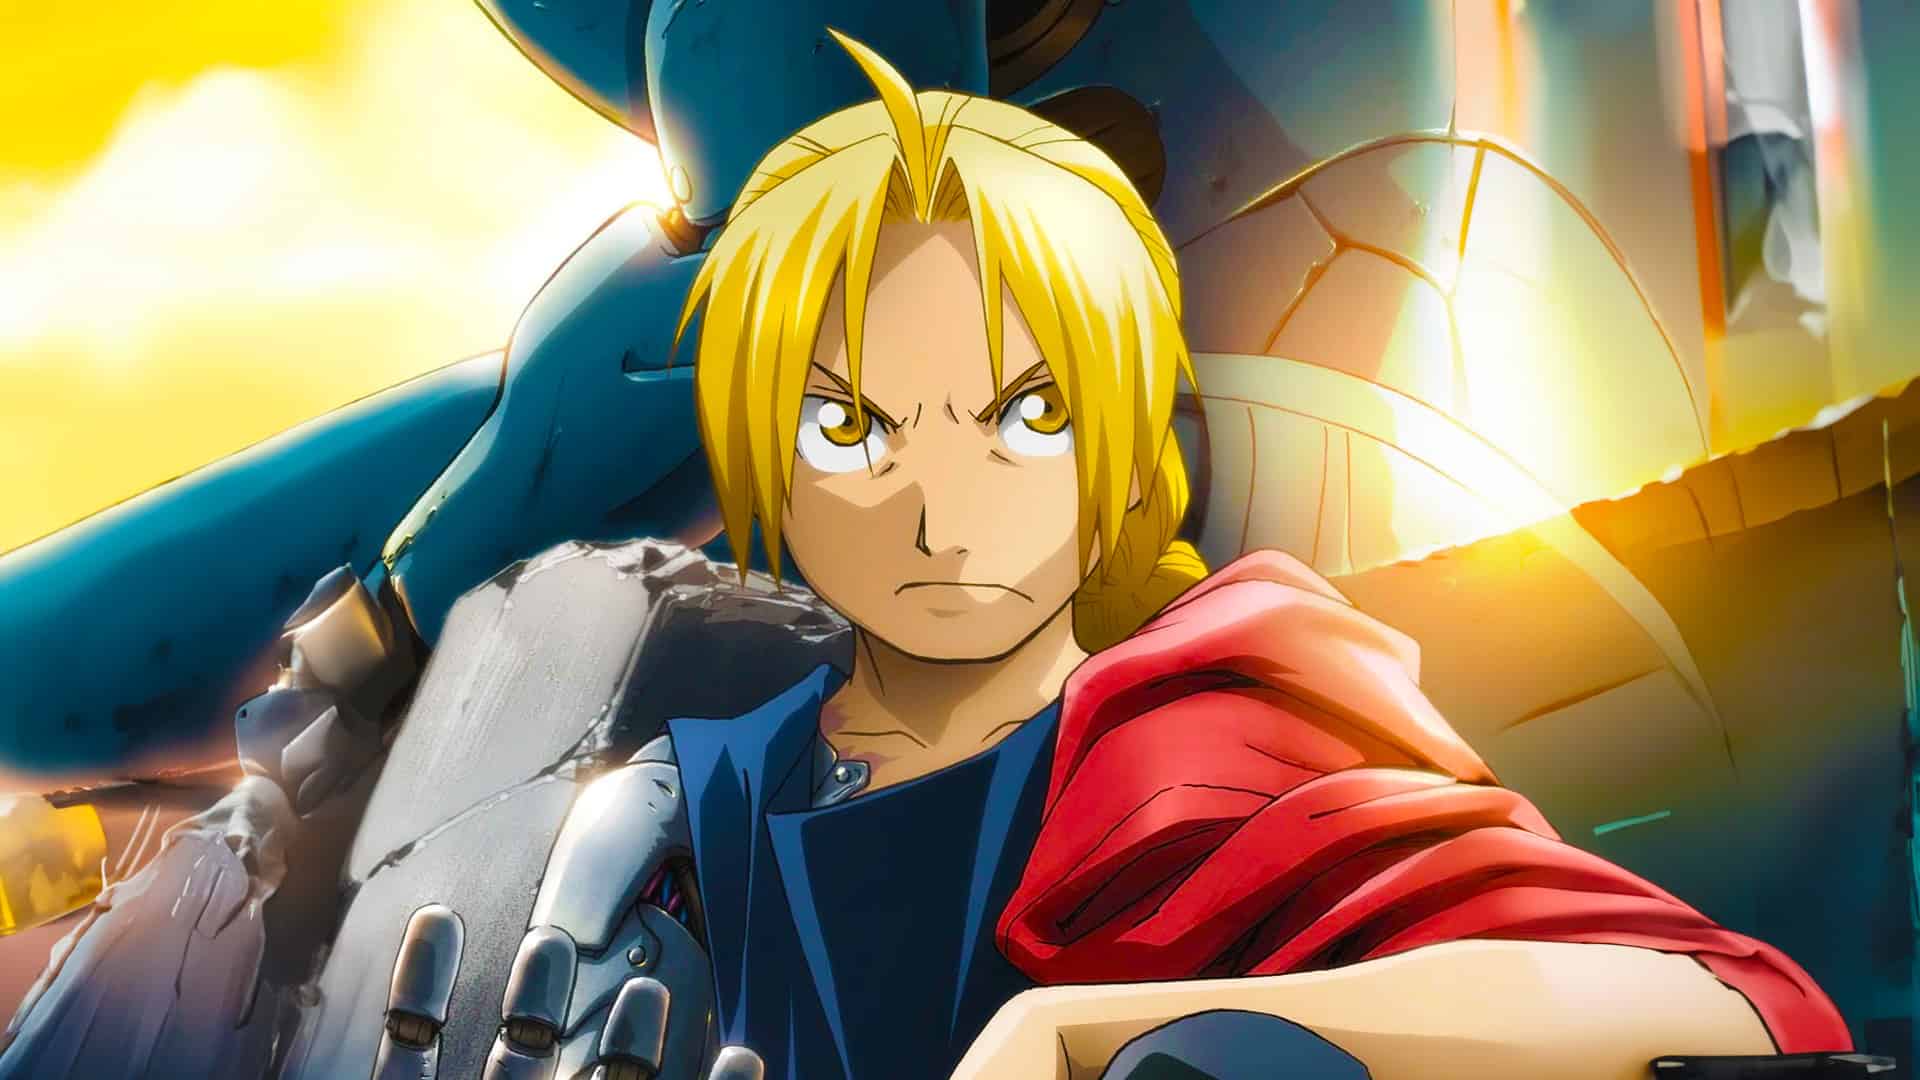 Strongest anime character of all time? 5 powerful candidates